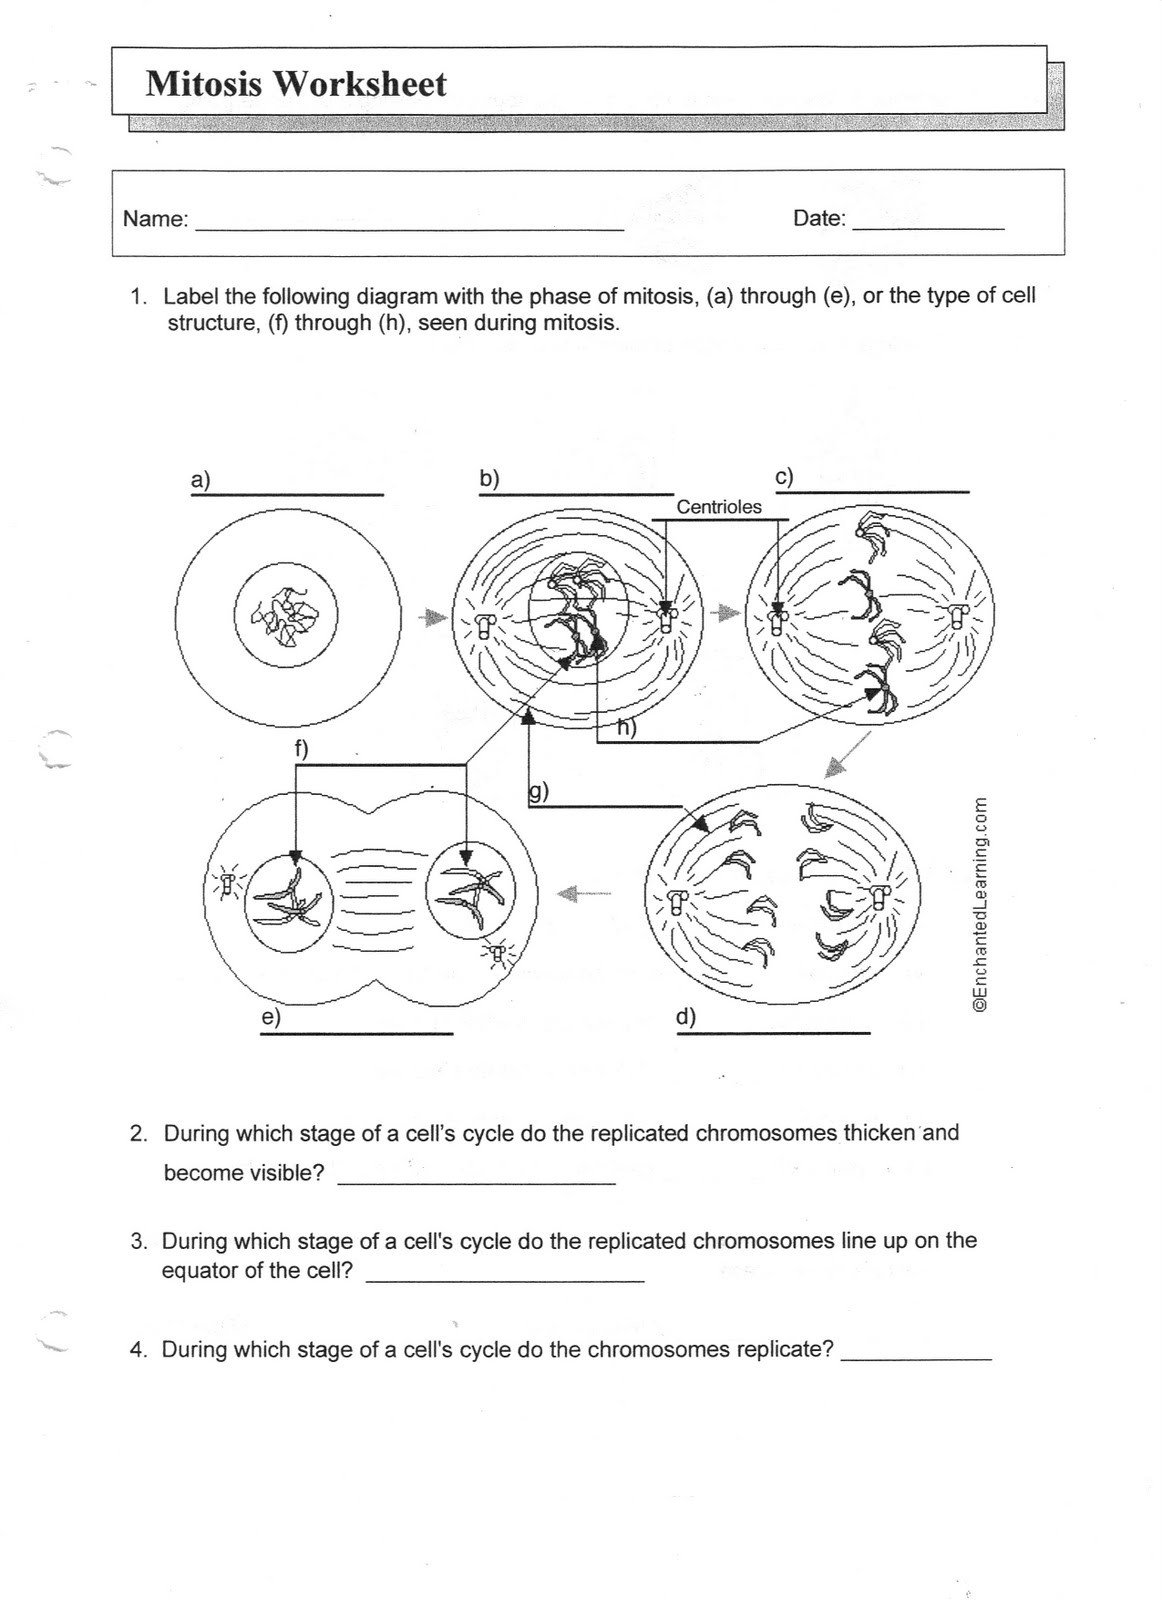 Cell Cycle Worksheet Answers Mitosis Worksheet Answer Key Biology